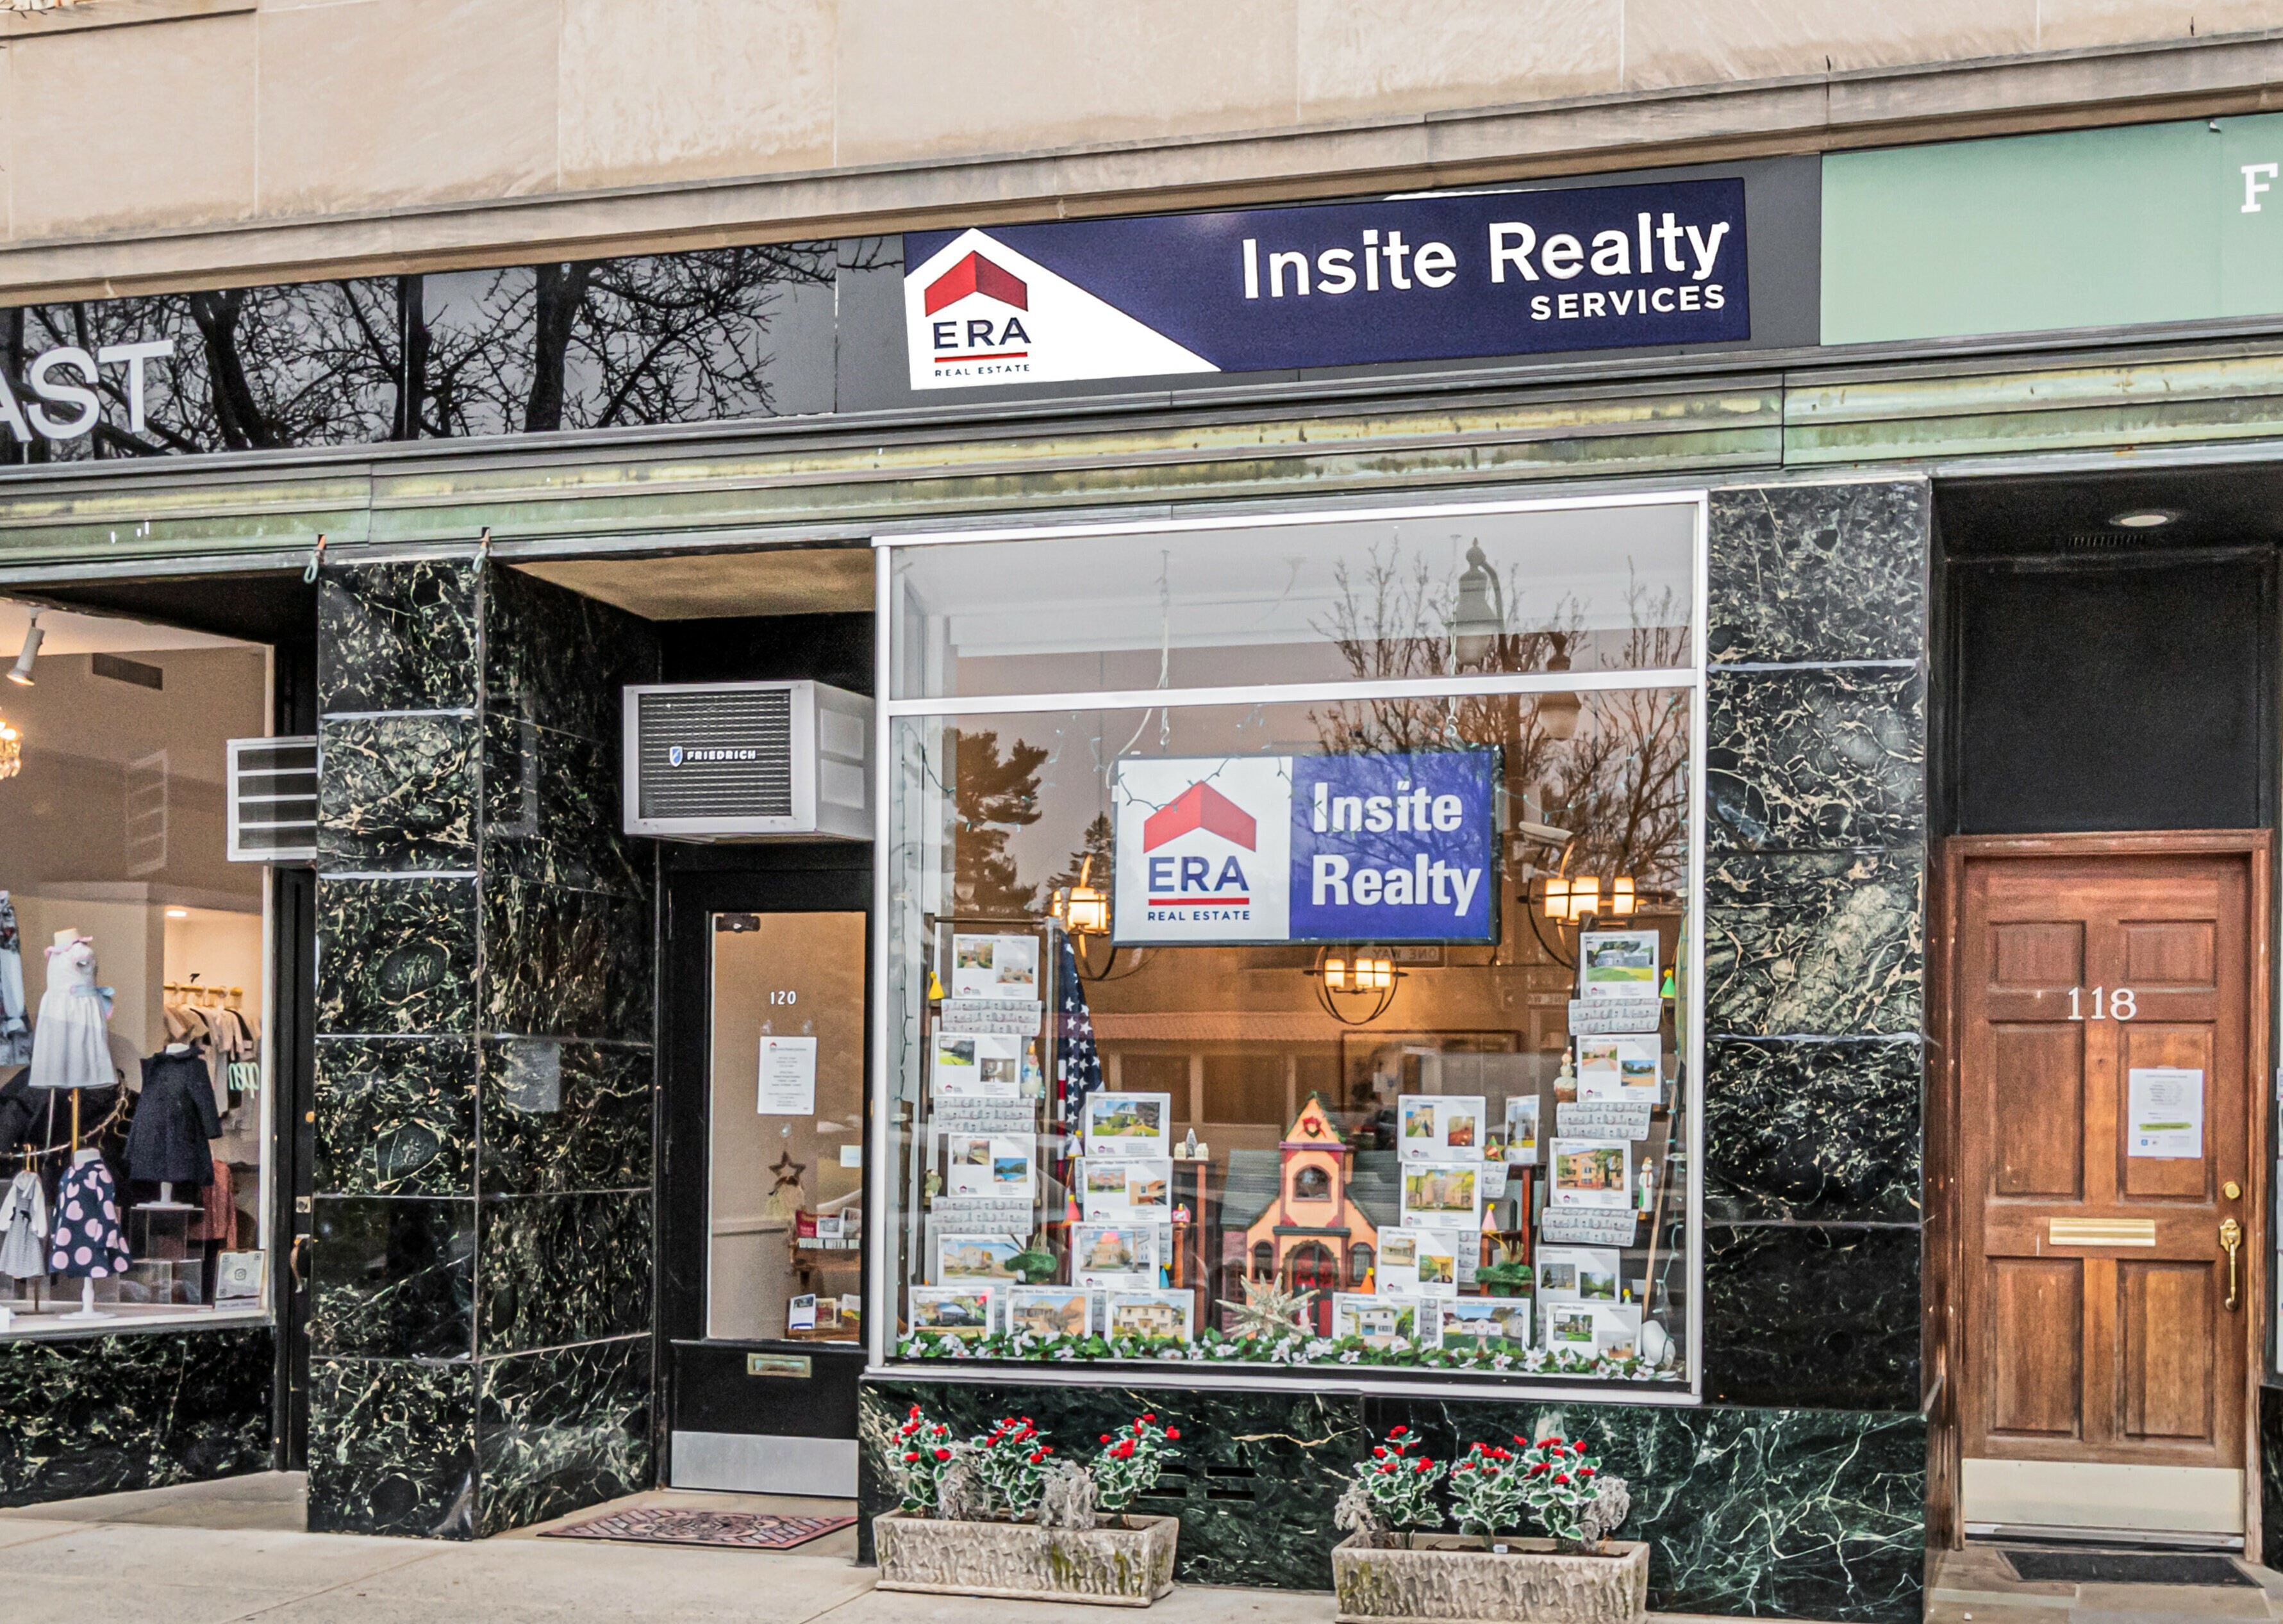 ERA Insite Realty Services,Bronxville,Era Insite Realty Services